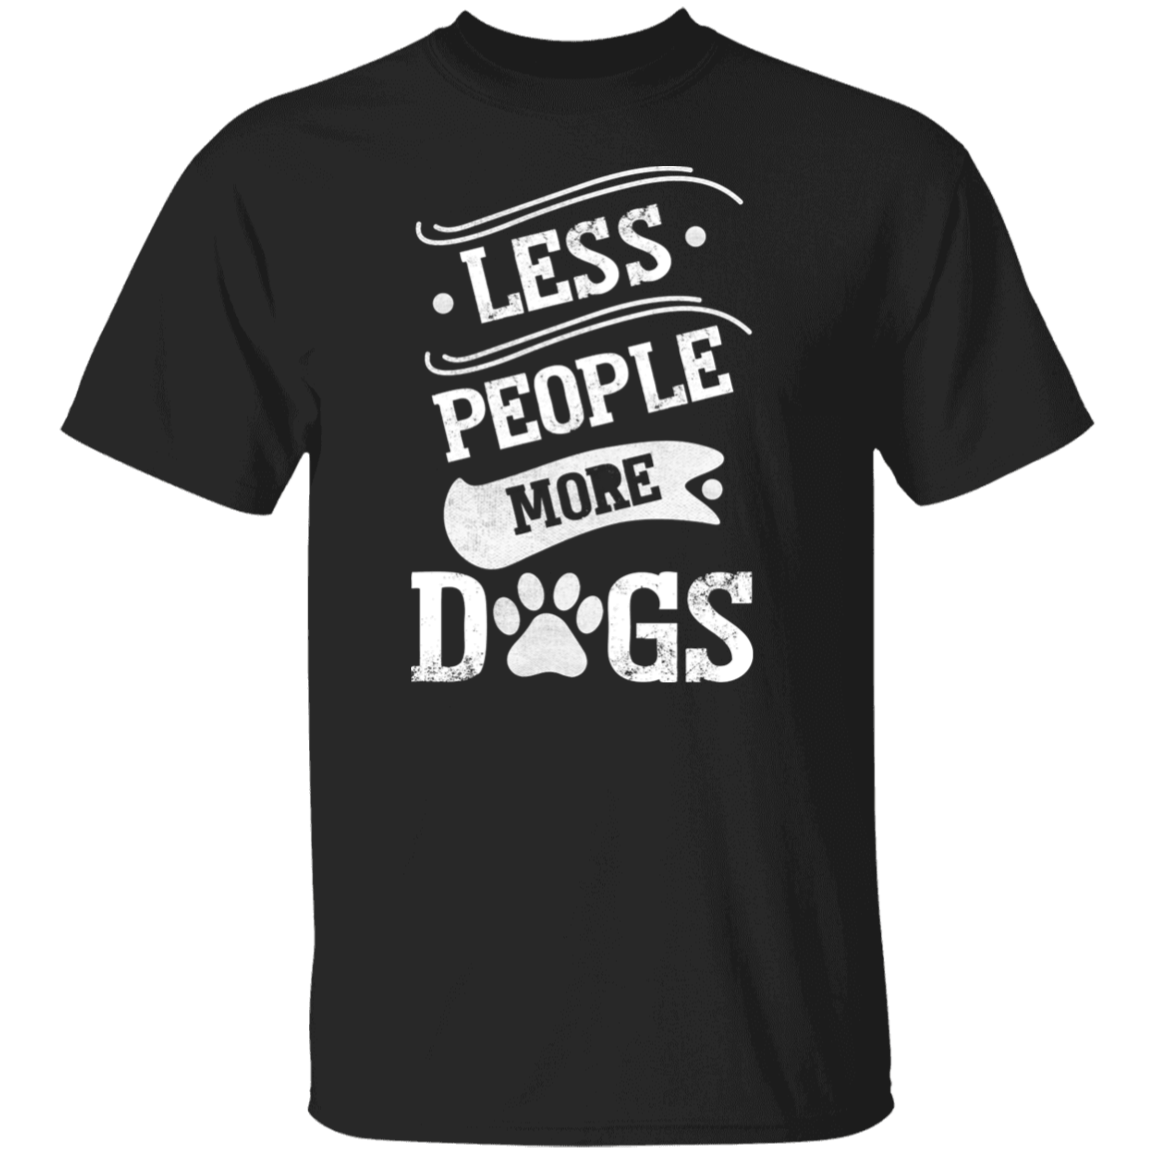 Less People More Dogs - T Shirt.